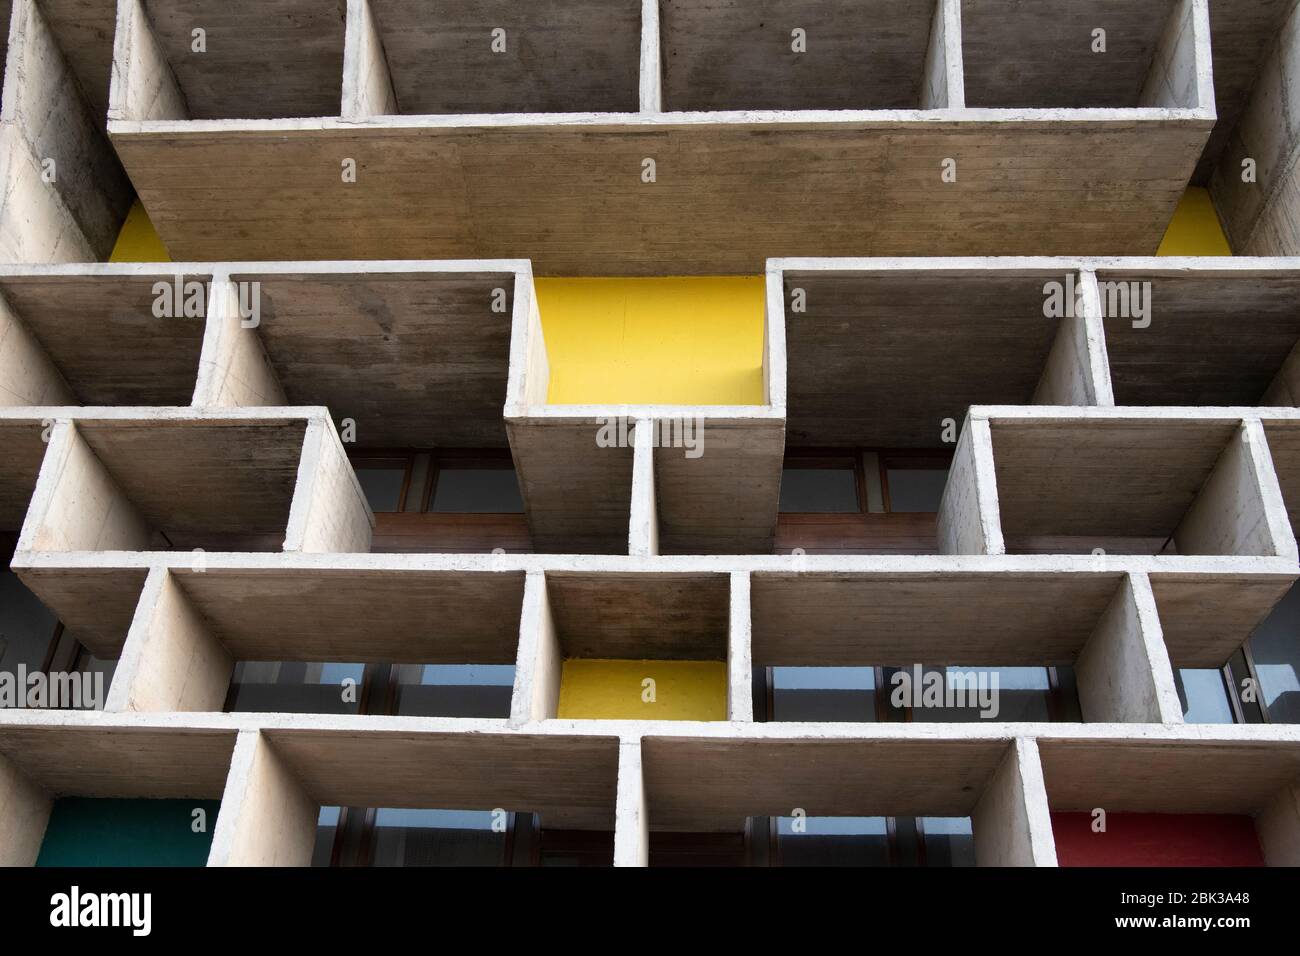 Detail Le Corbusier design Punjab and Haryana High Court Chandigarh India Stock Photo